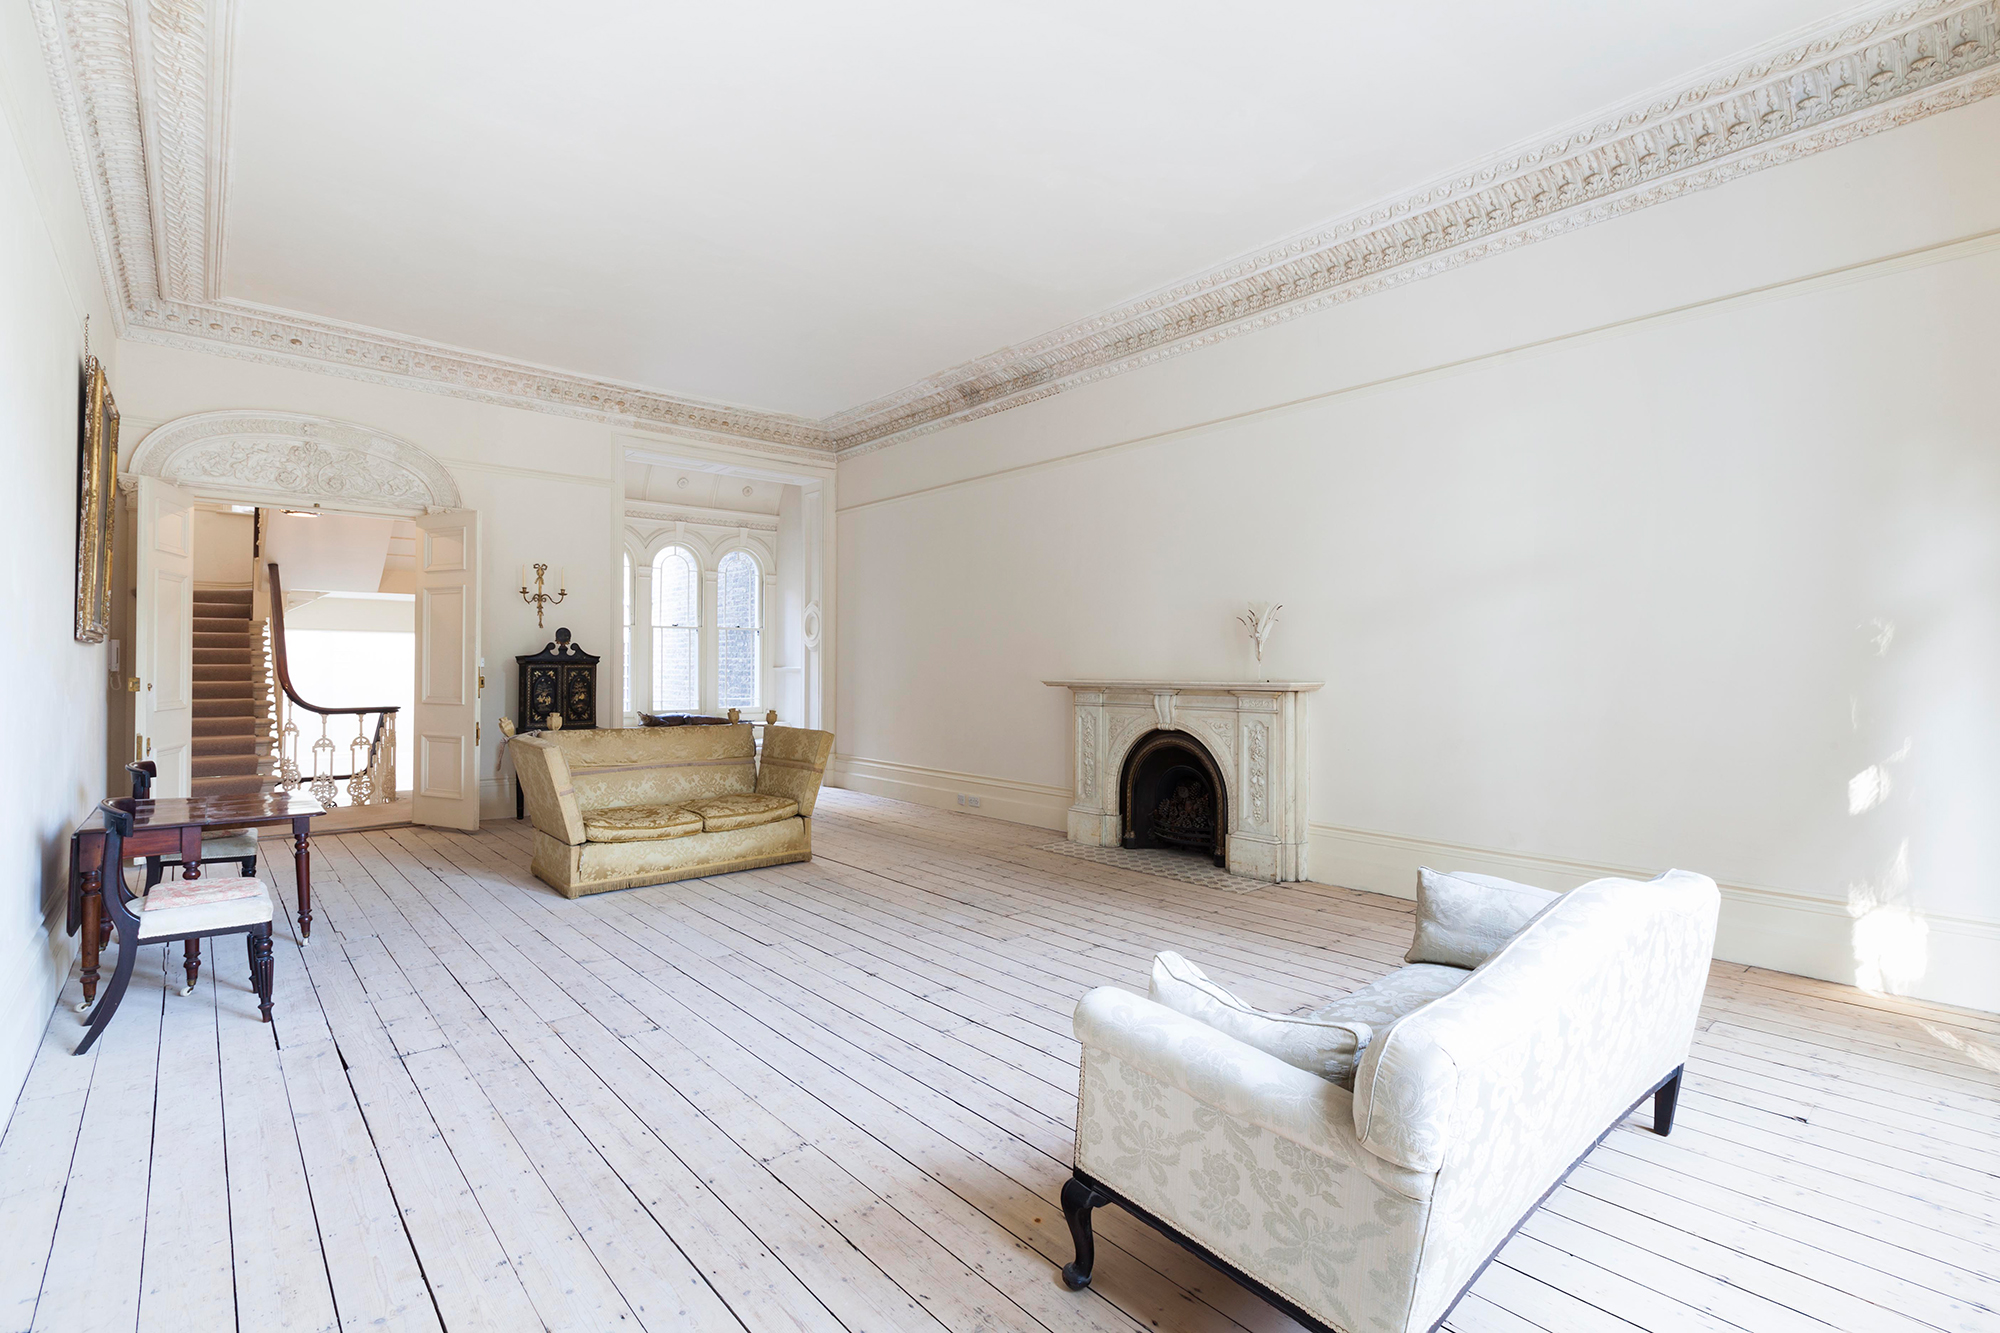 For Sale: Linden Gardens Notting Hill W11 minimalist period reception room